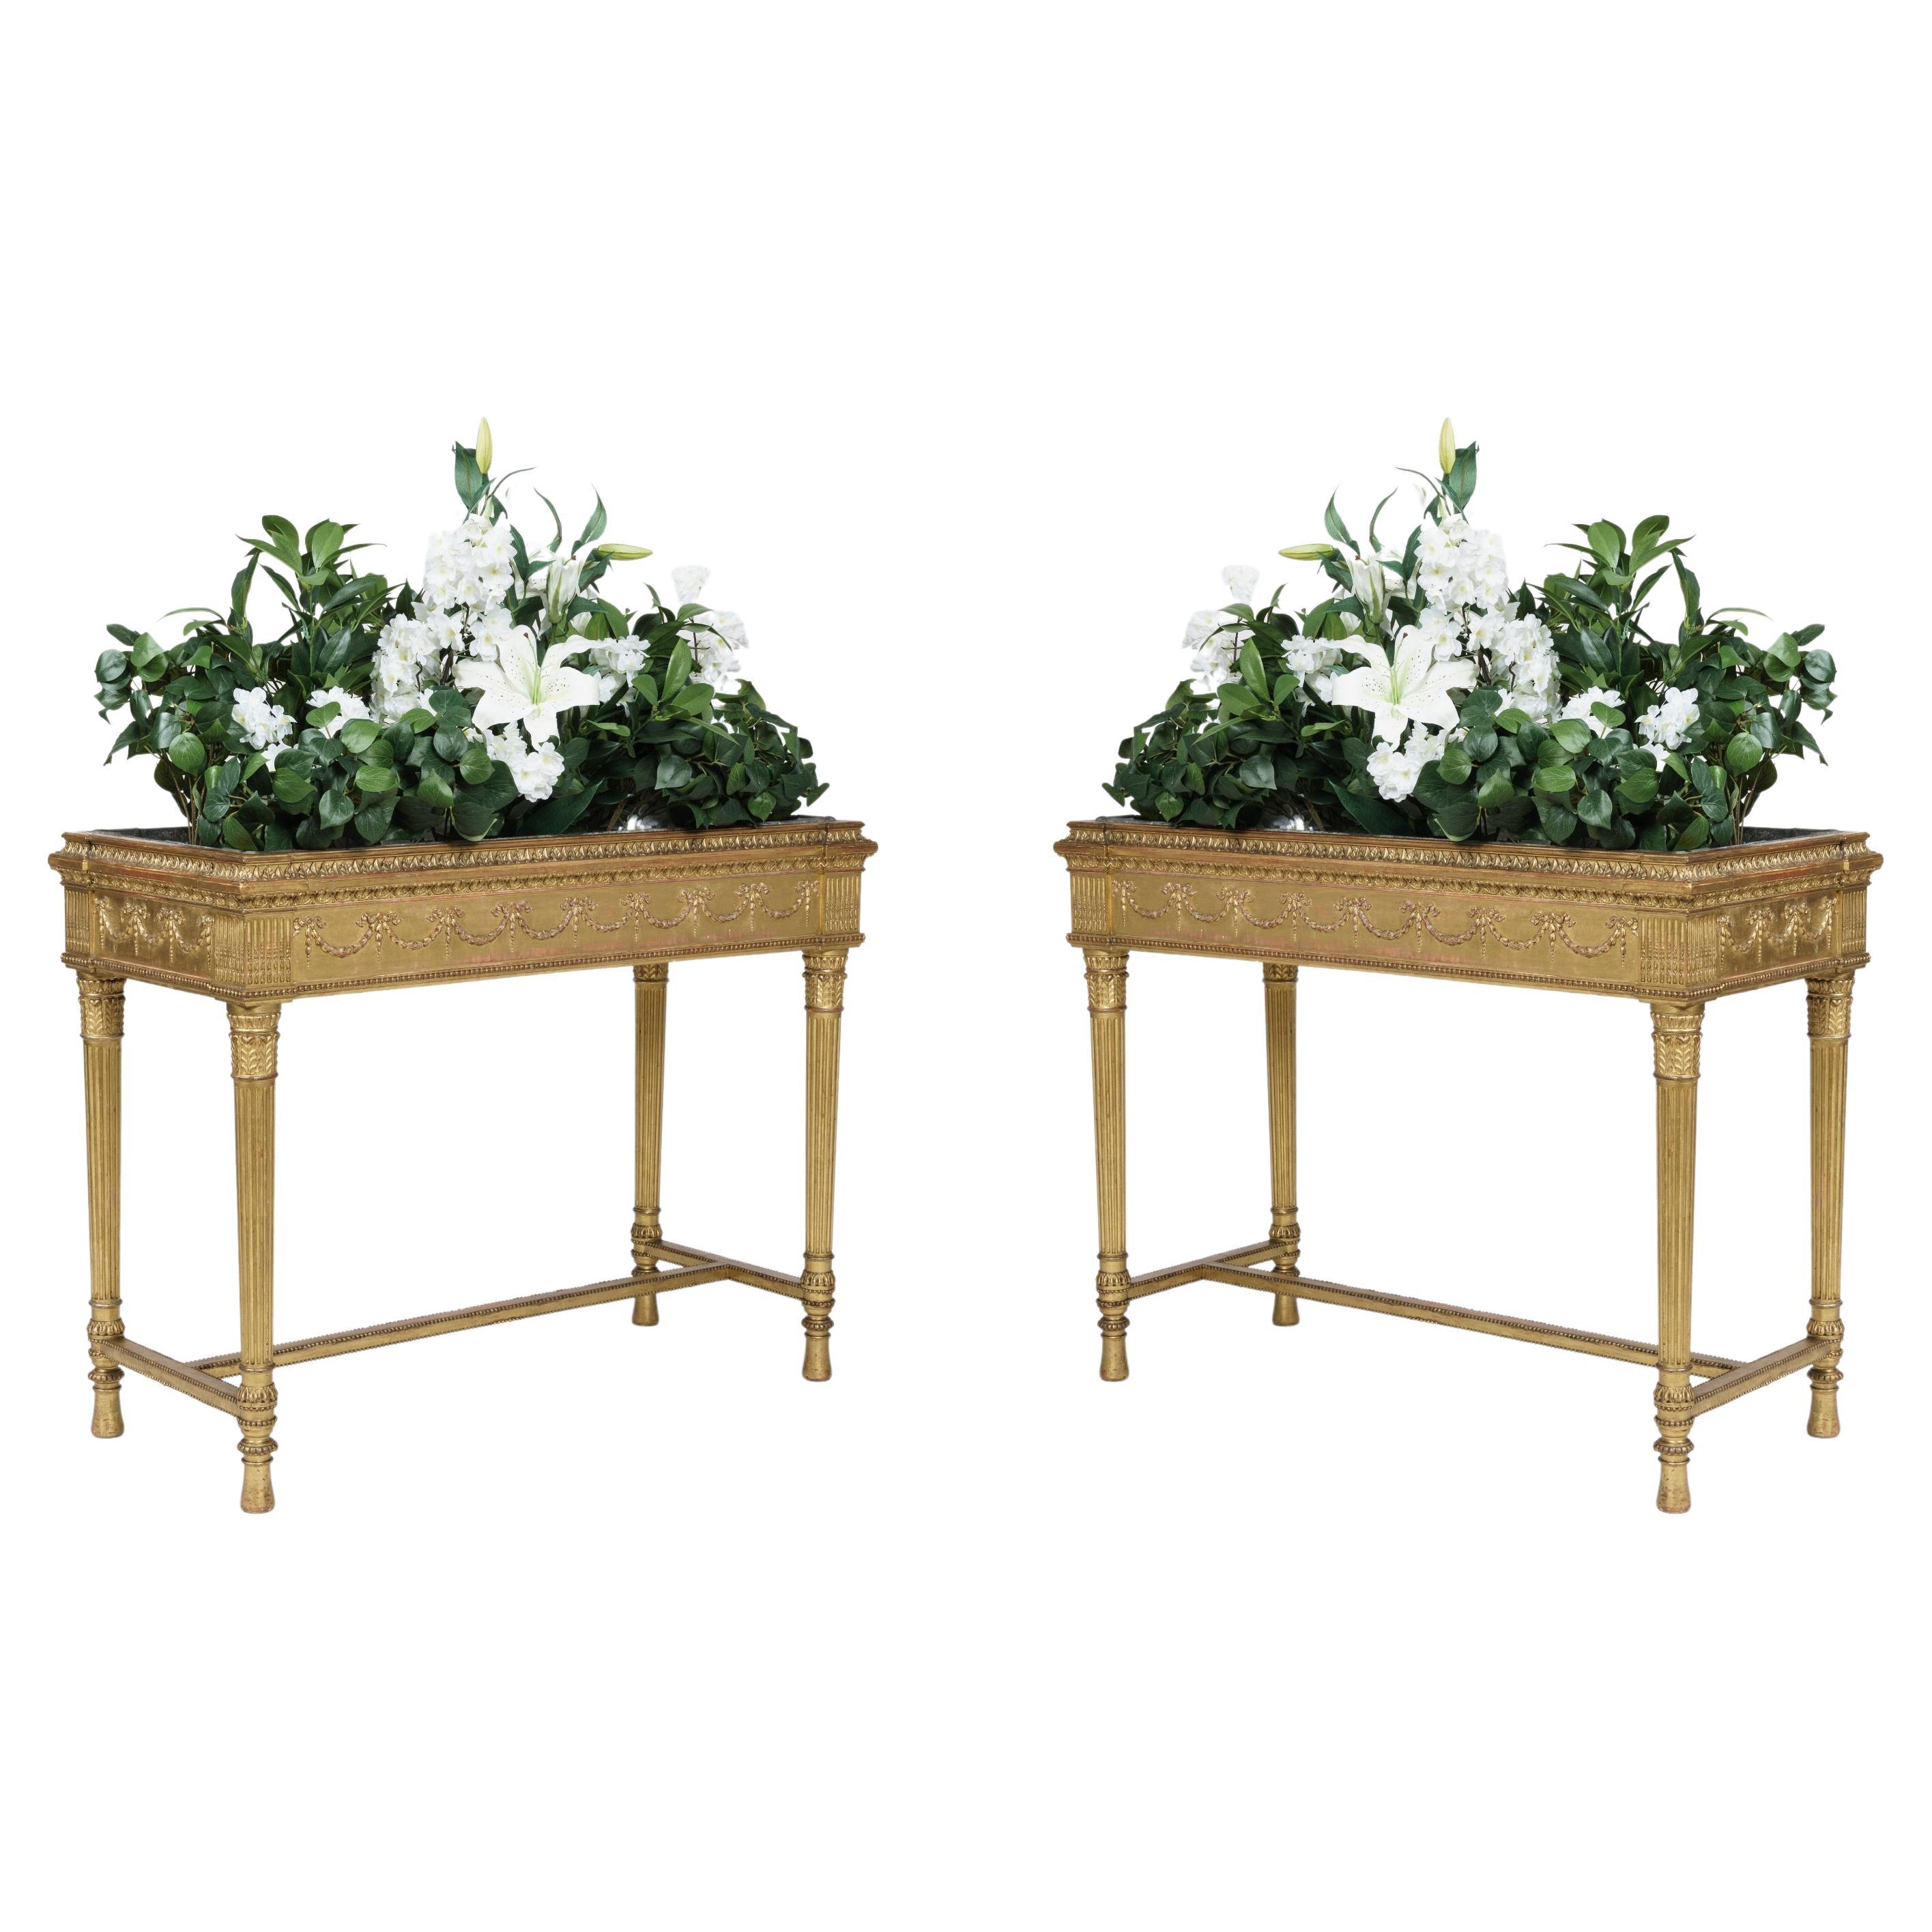 Pair of Neoclassical Carved and Gilded Planters